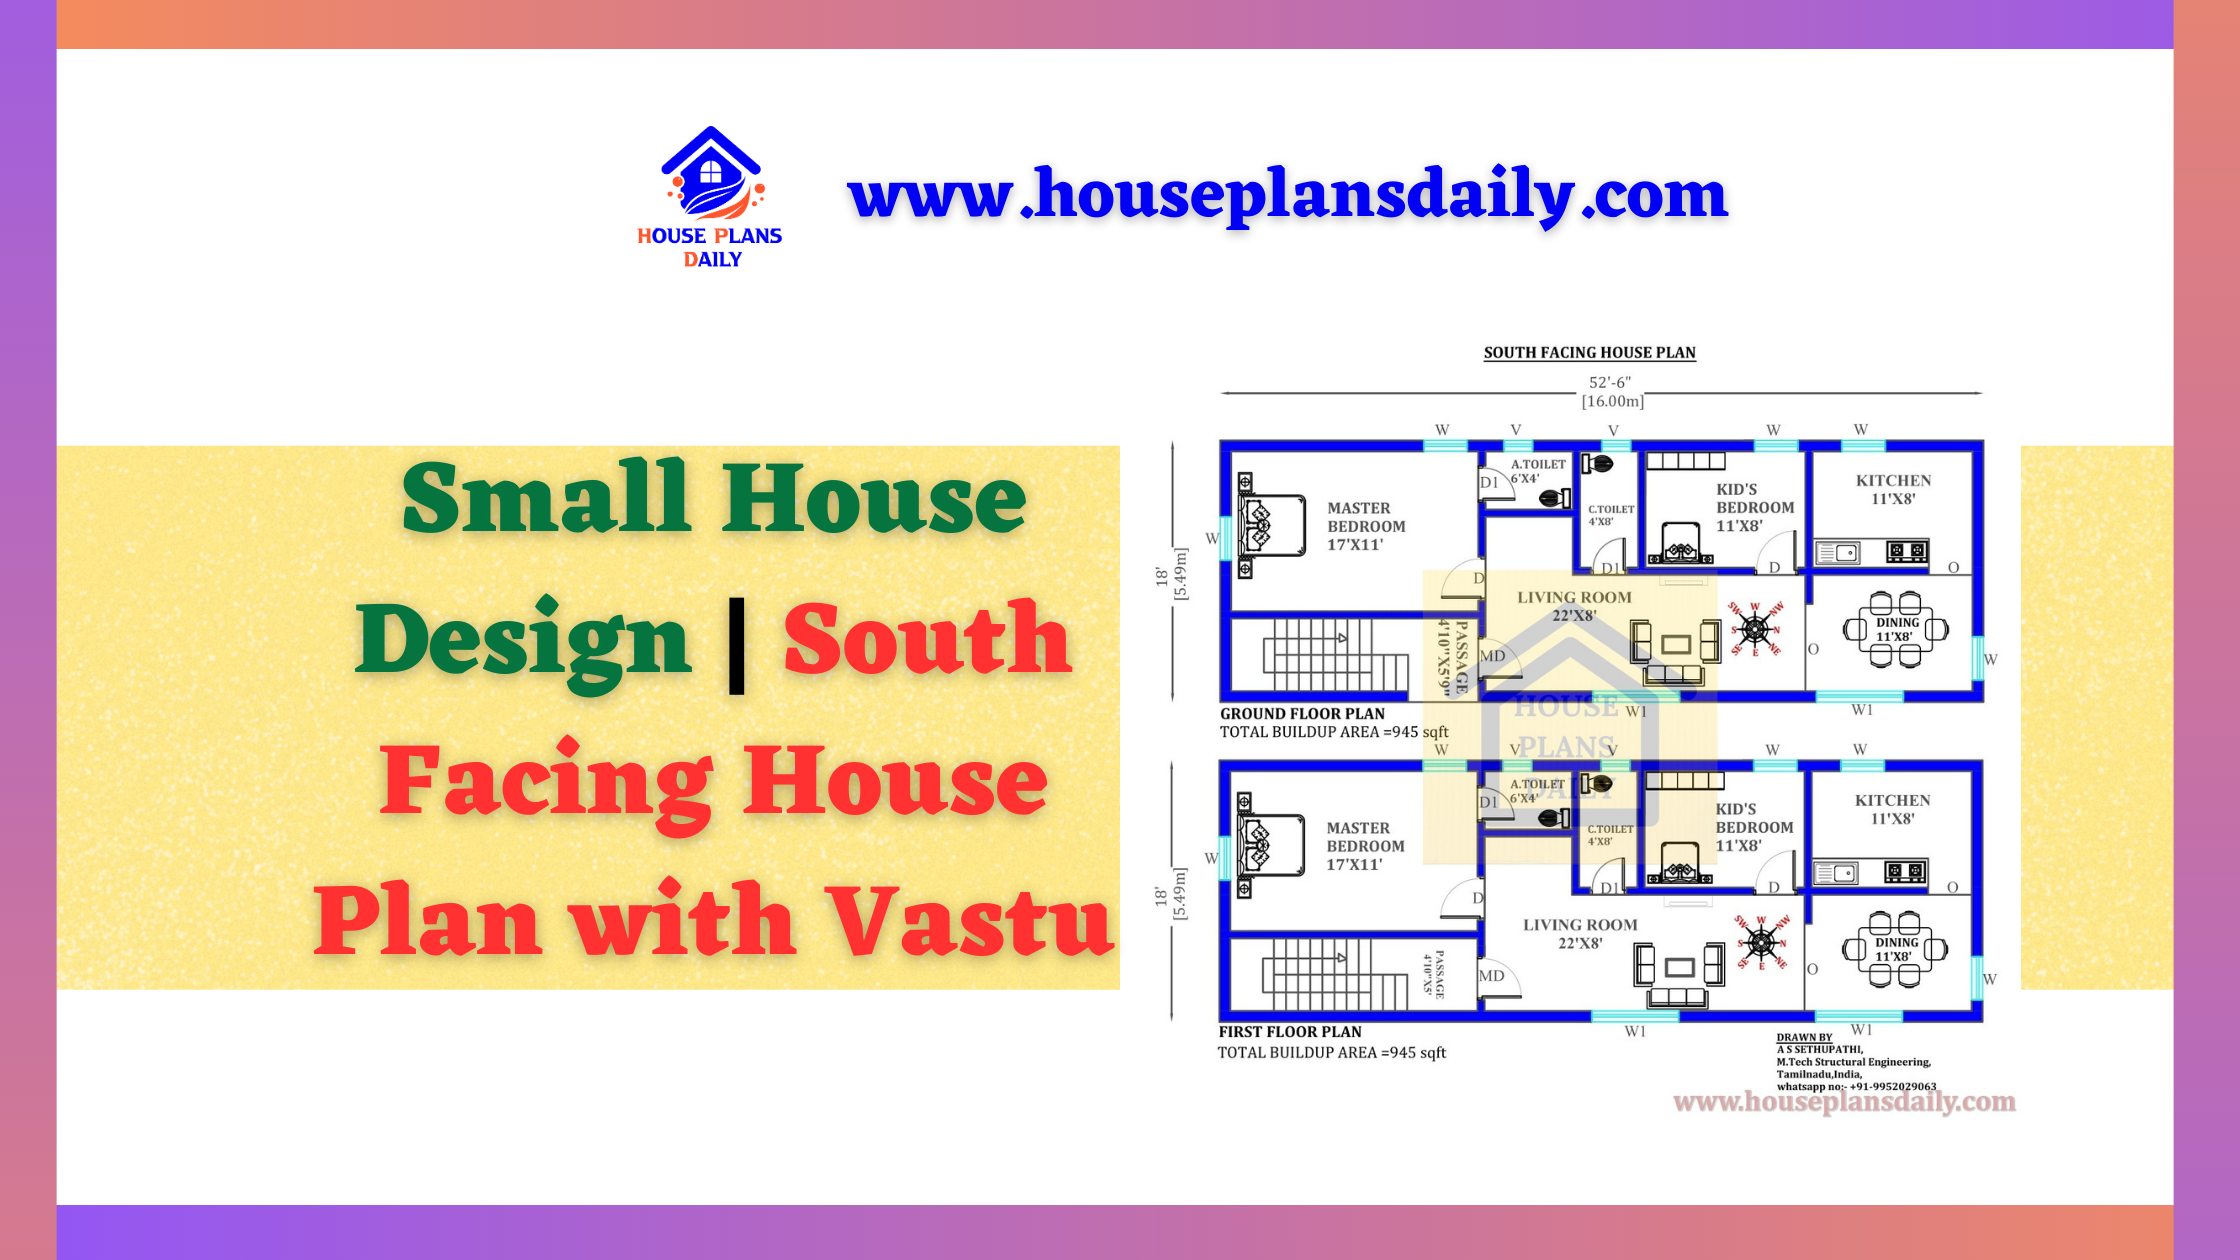 Small House Design | South Facing House Plan with Vastu